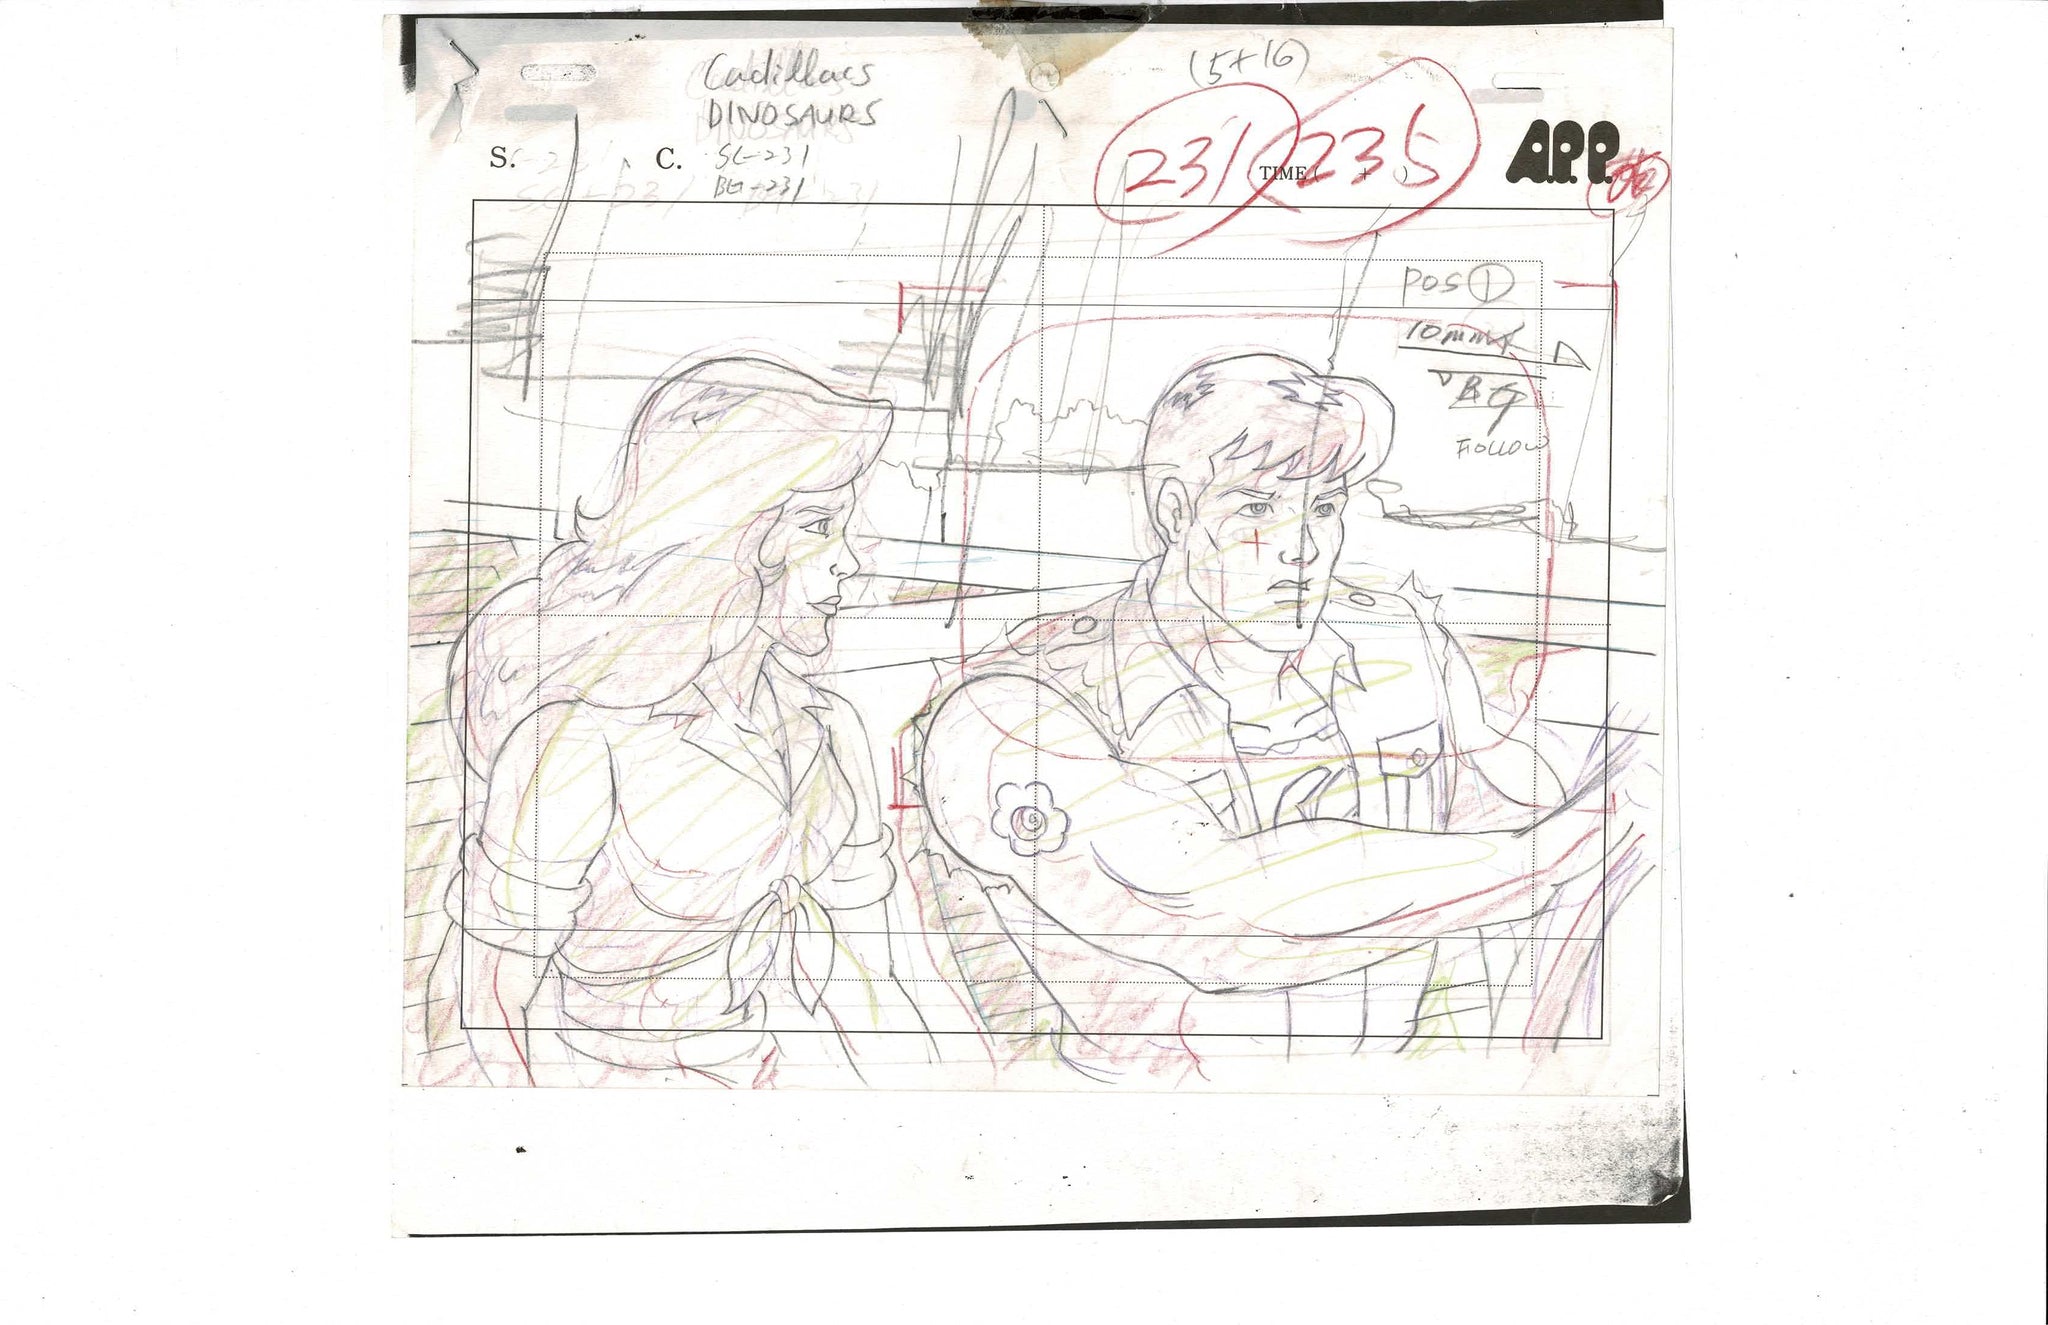 Cadilacs and Dinosaurs sketch EX5504 - Animation Legends